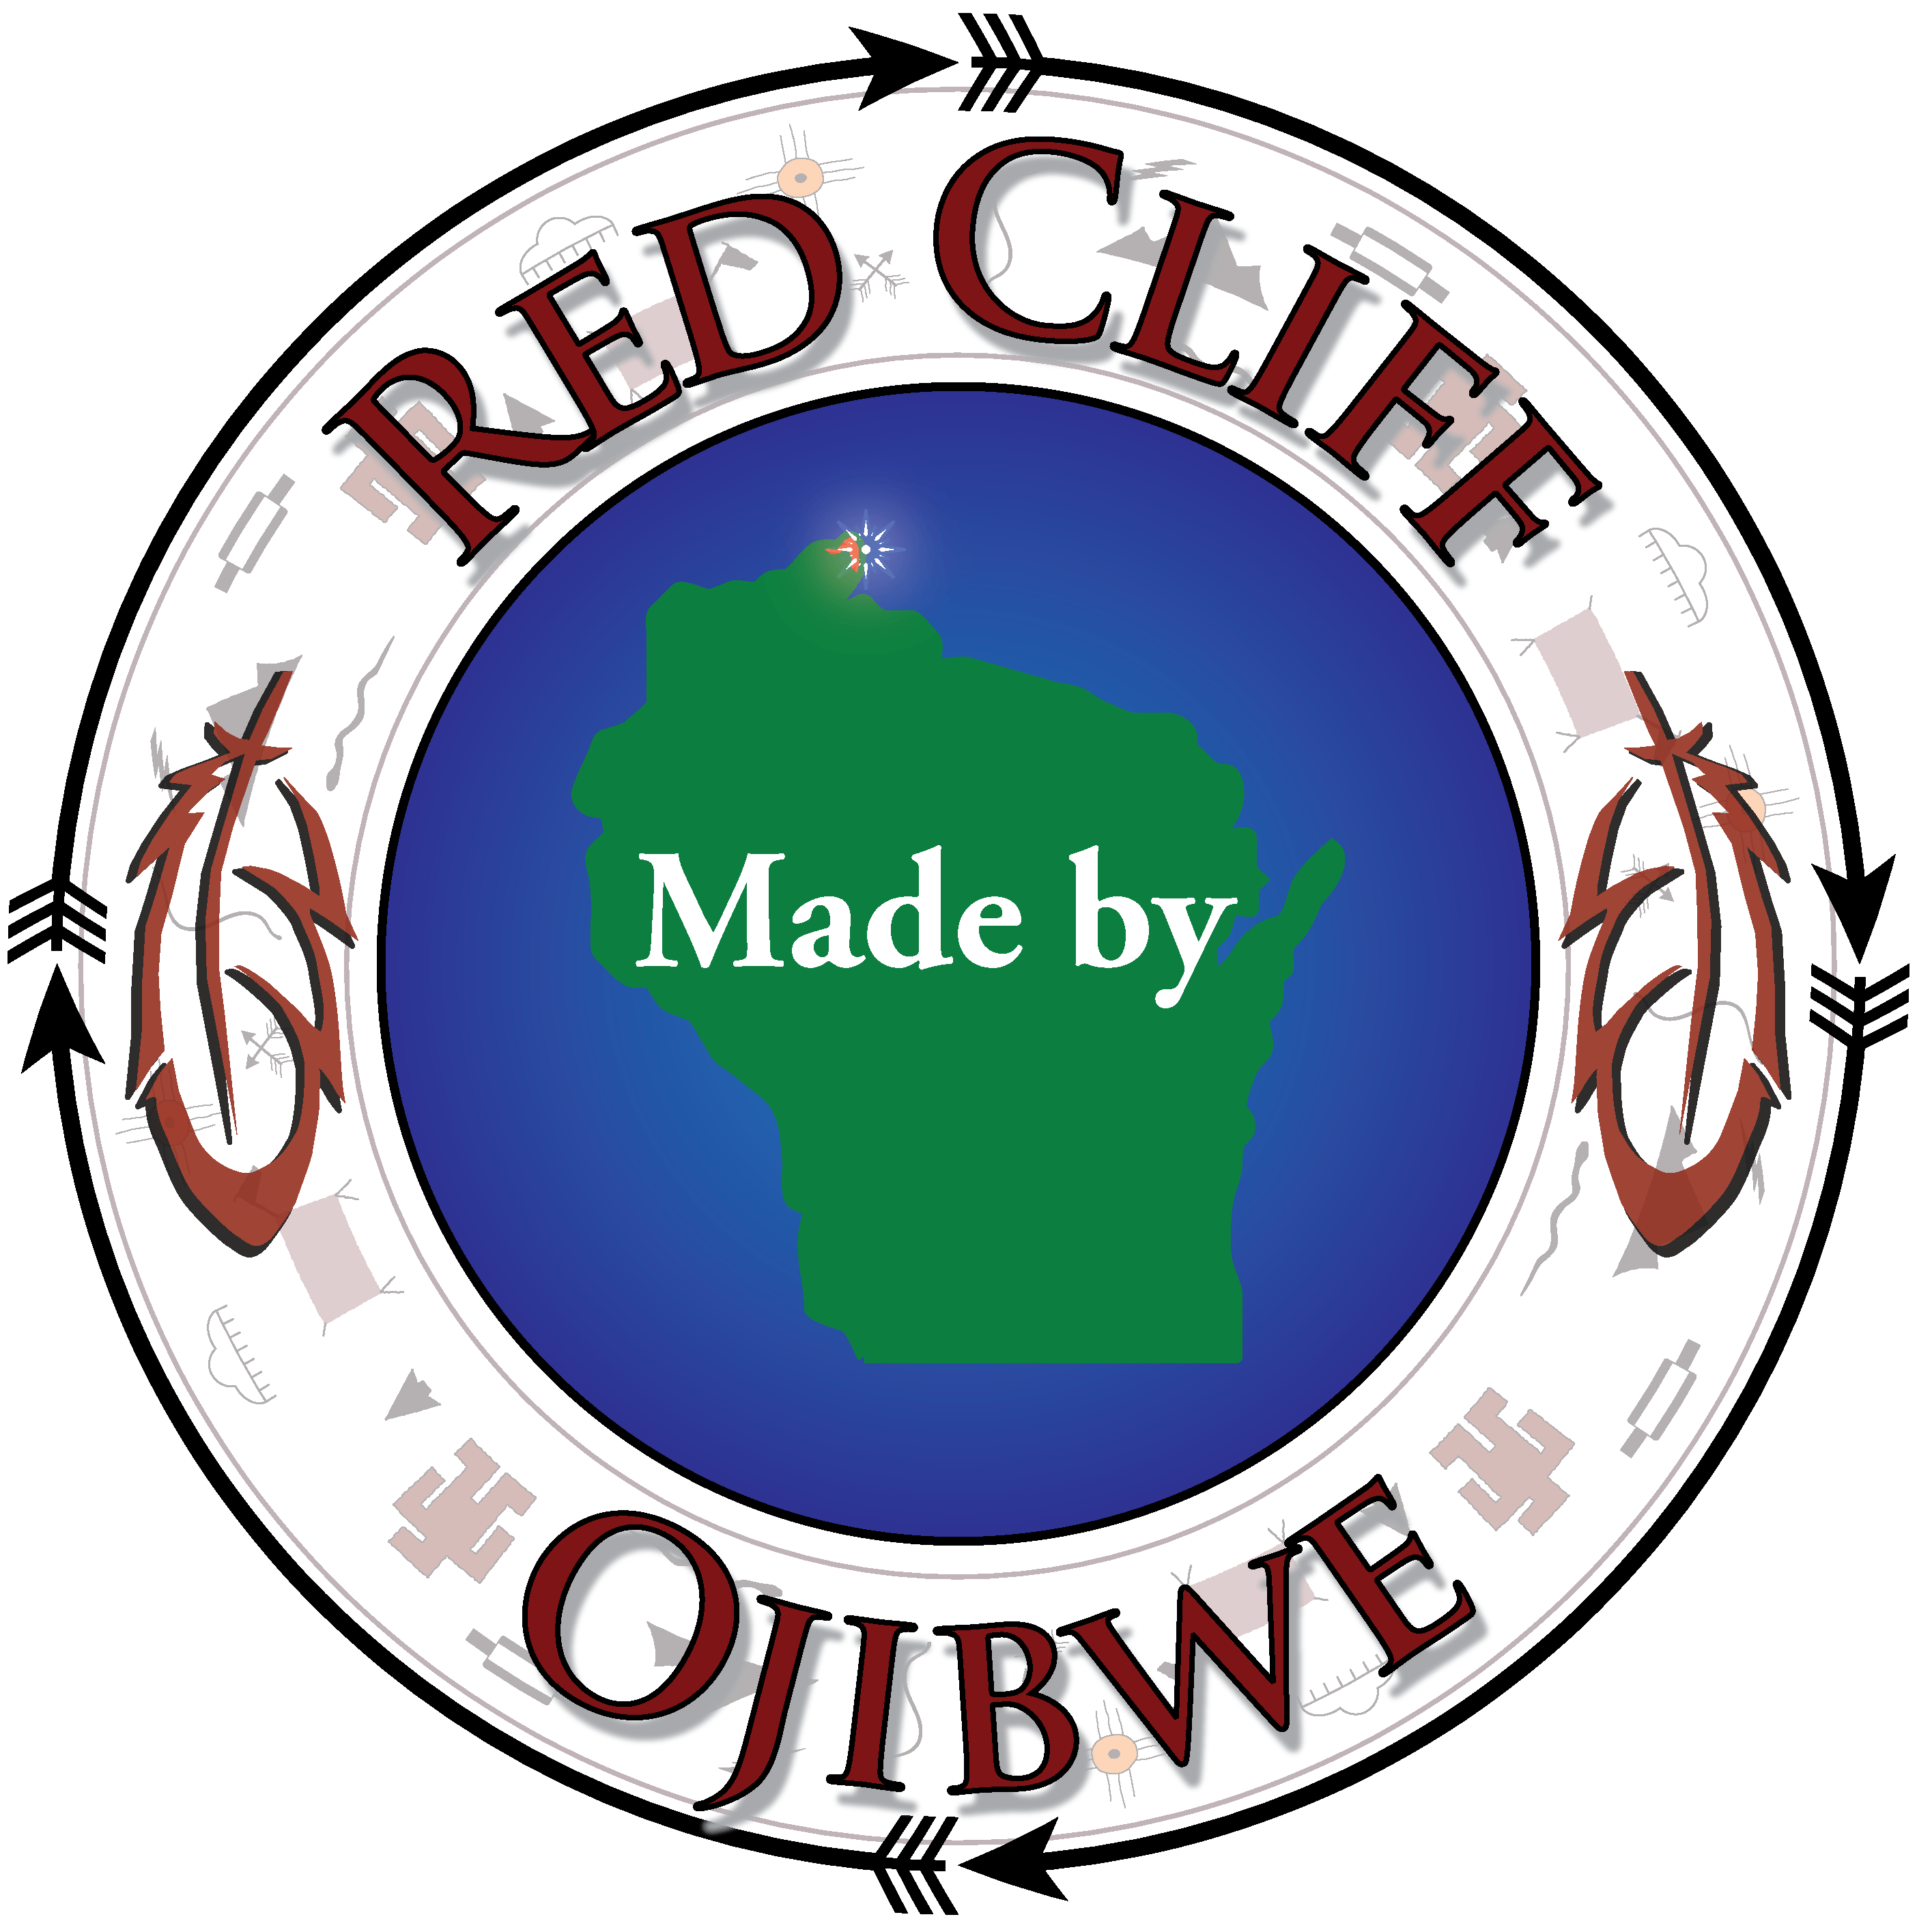 Red Cliff Logo - This is a free use logo. This is a Made by Red Cliff Ojibwe sample